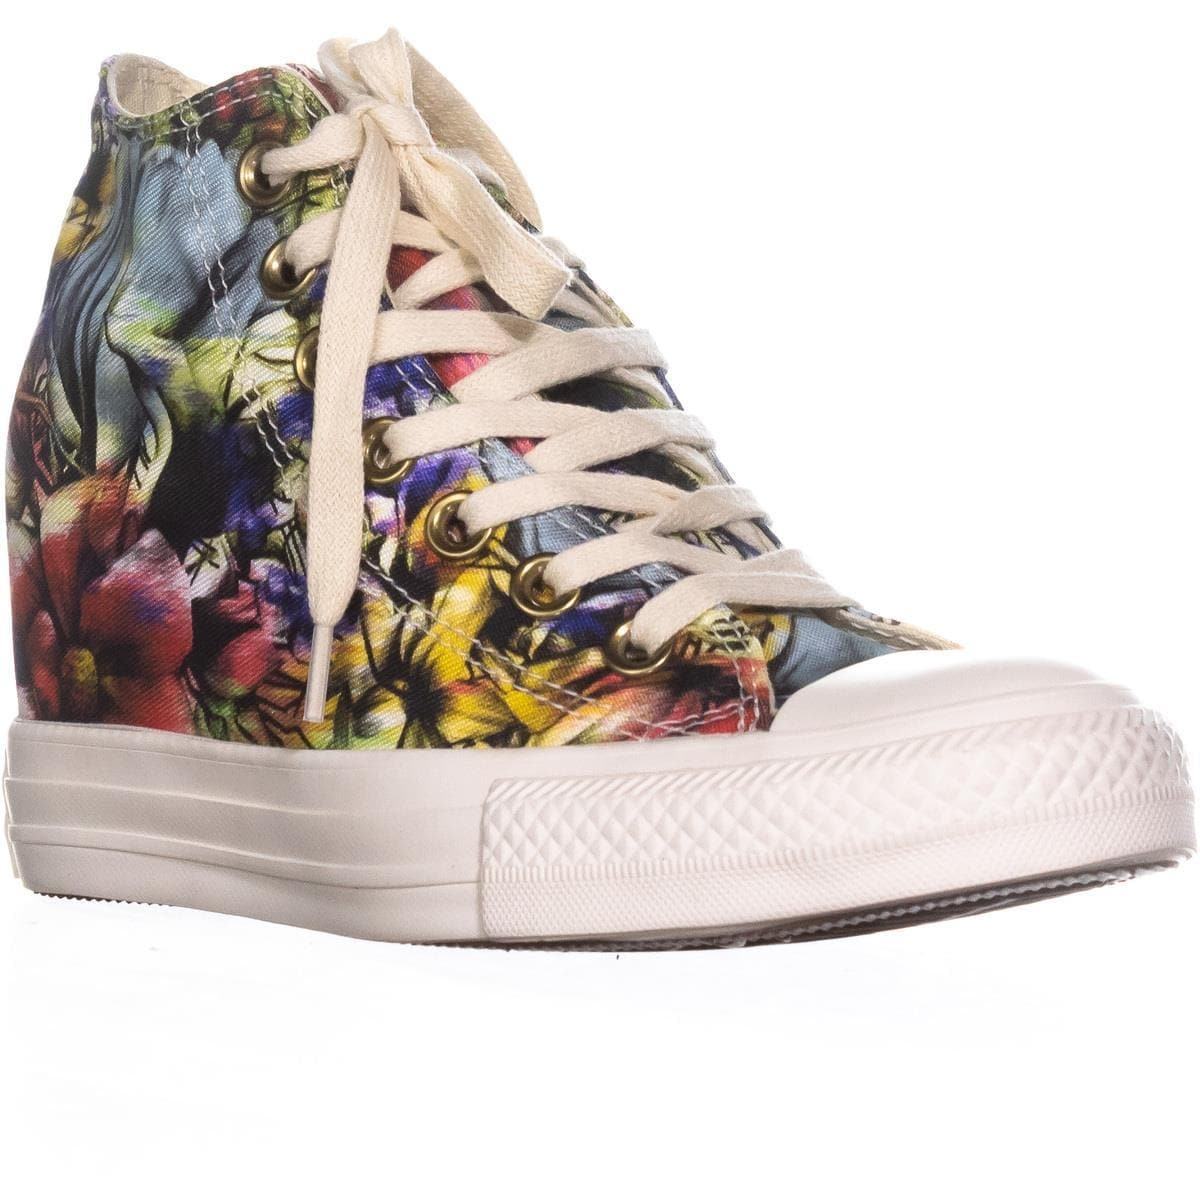 converse chuck taylor lux mid wedges